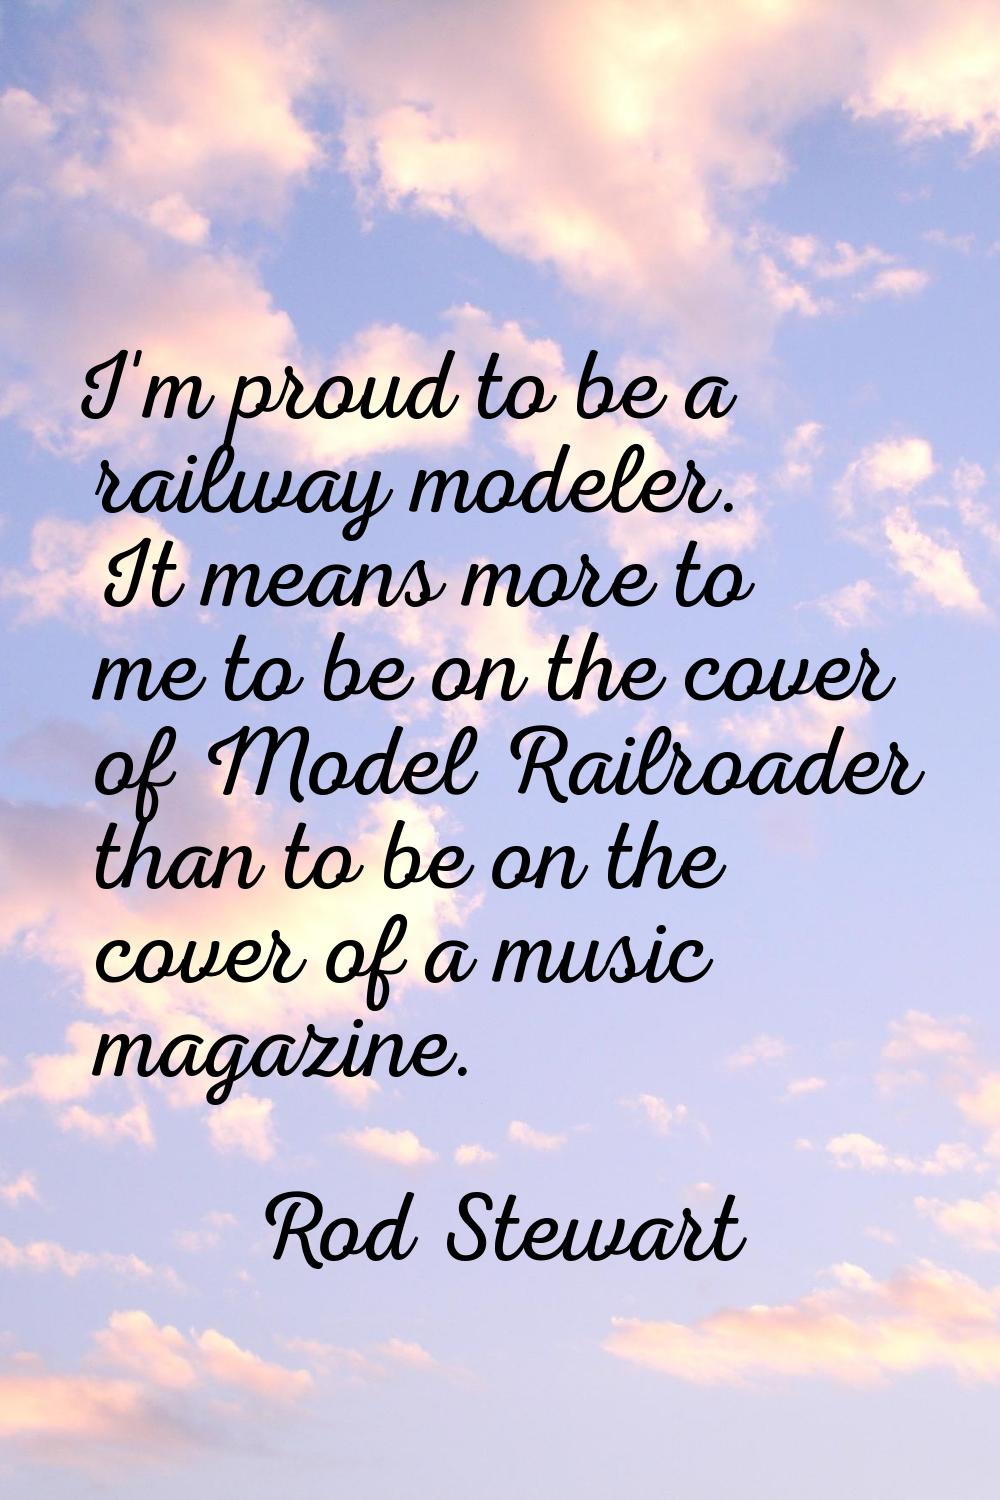 I'm proud to be a railway modeler. It means more to me to be on the cover of Model Railroader than 